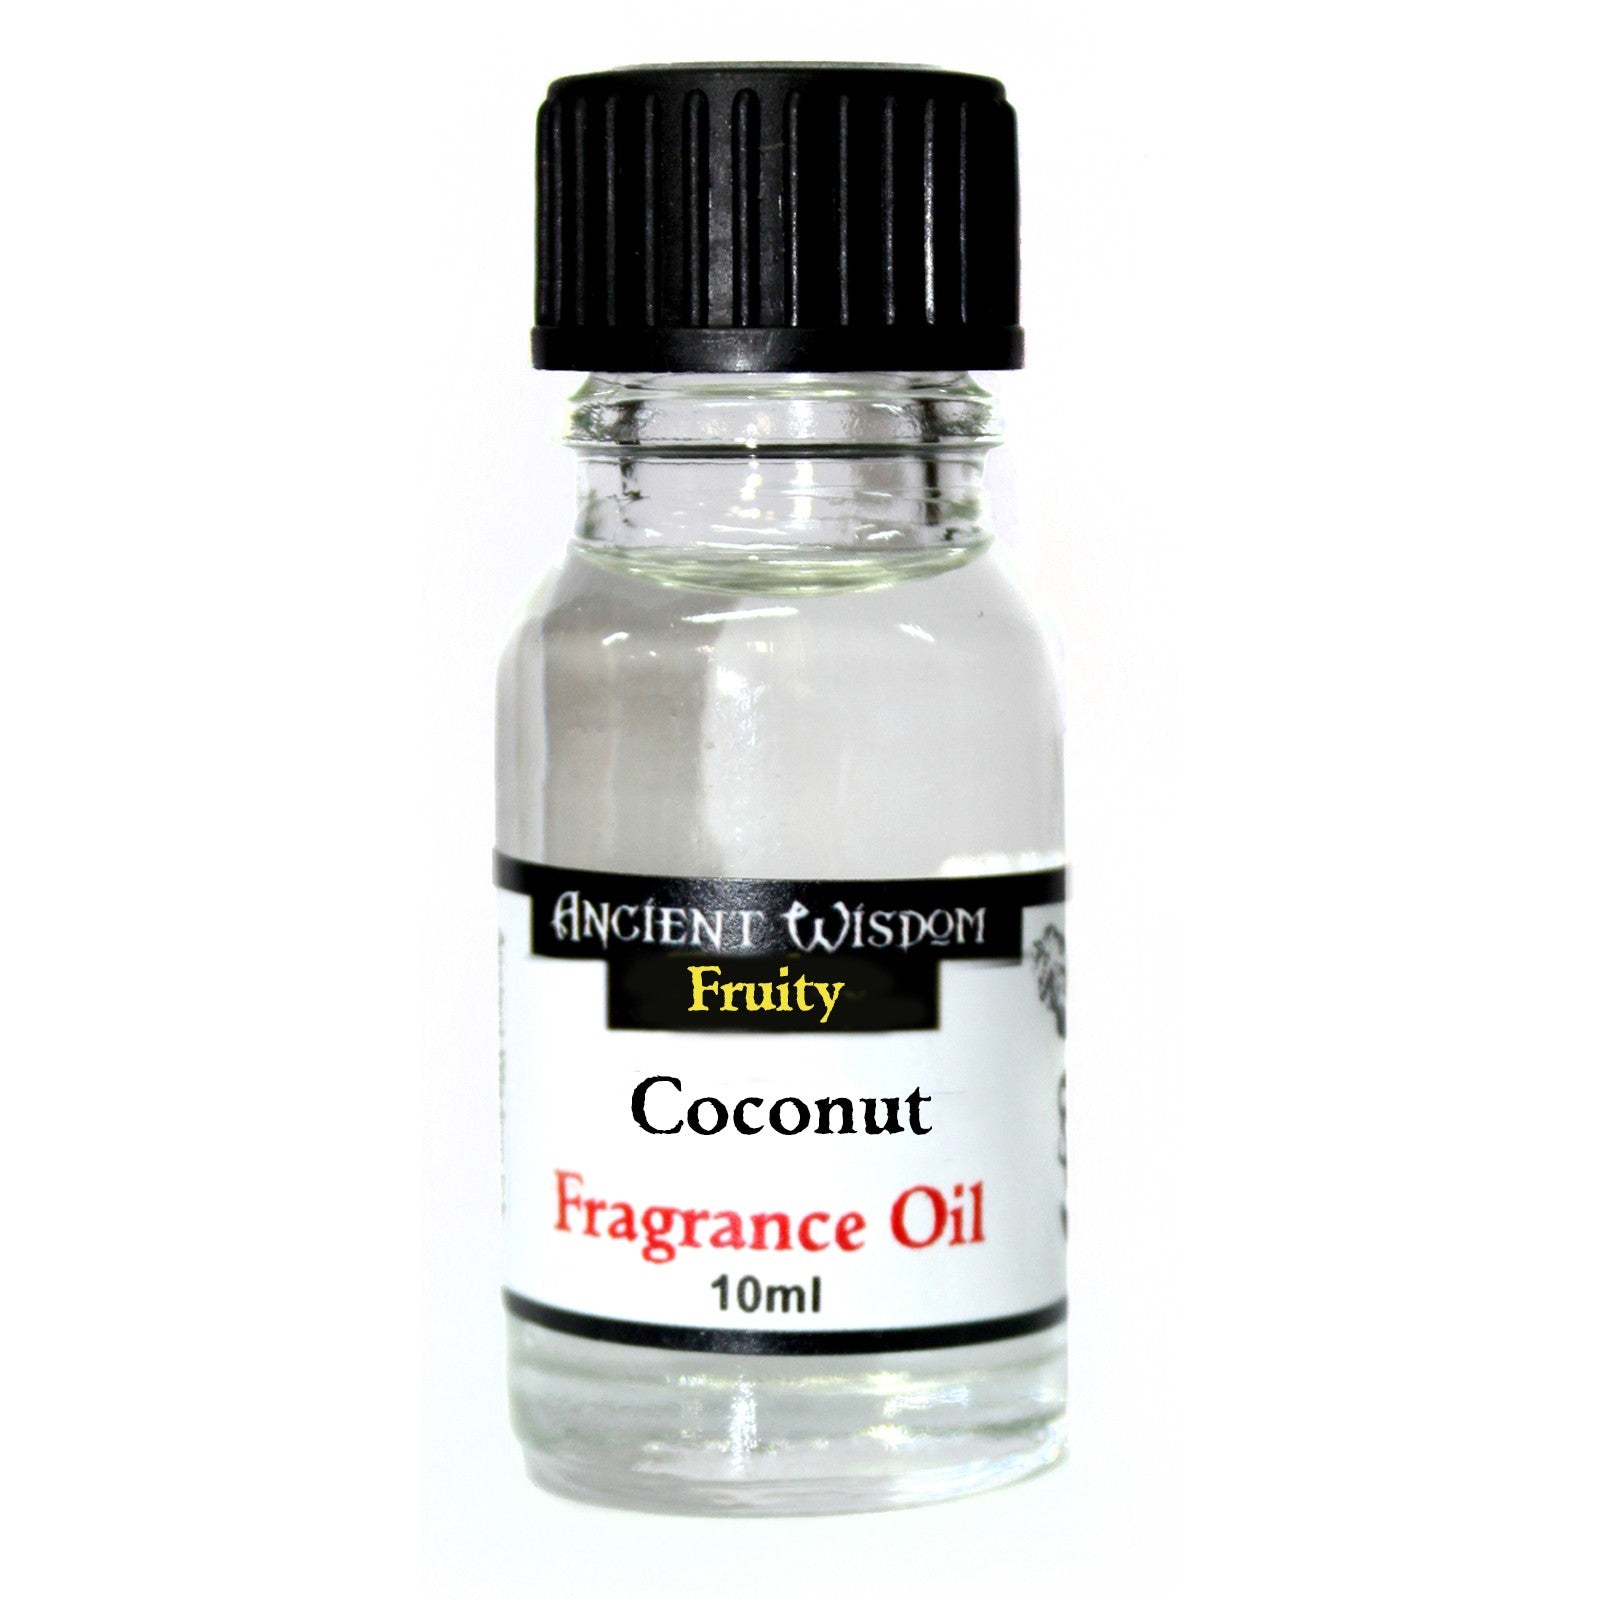 View 10ml Coconut Fragrance Oil information